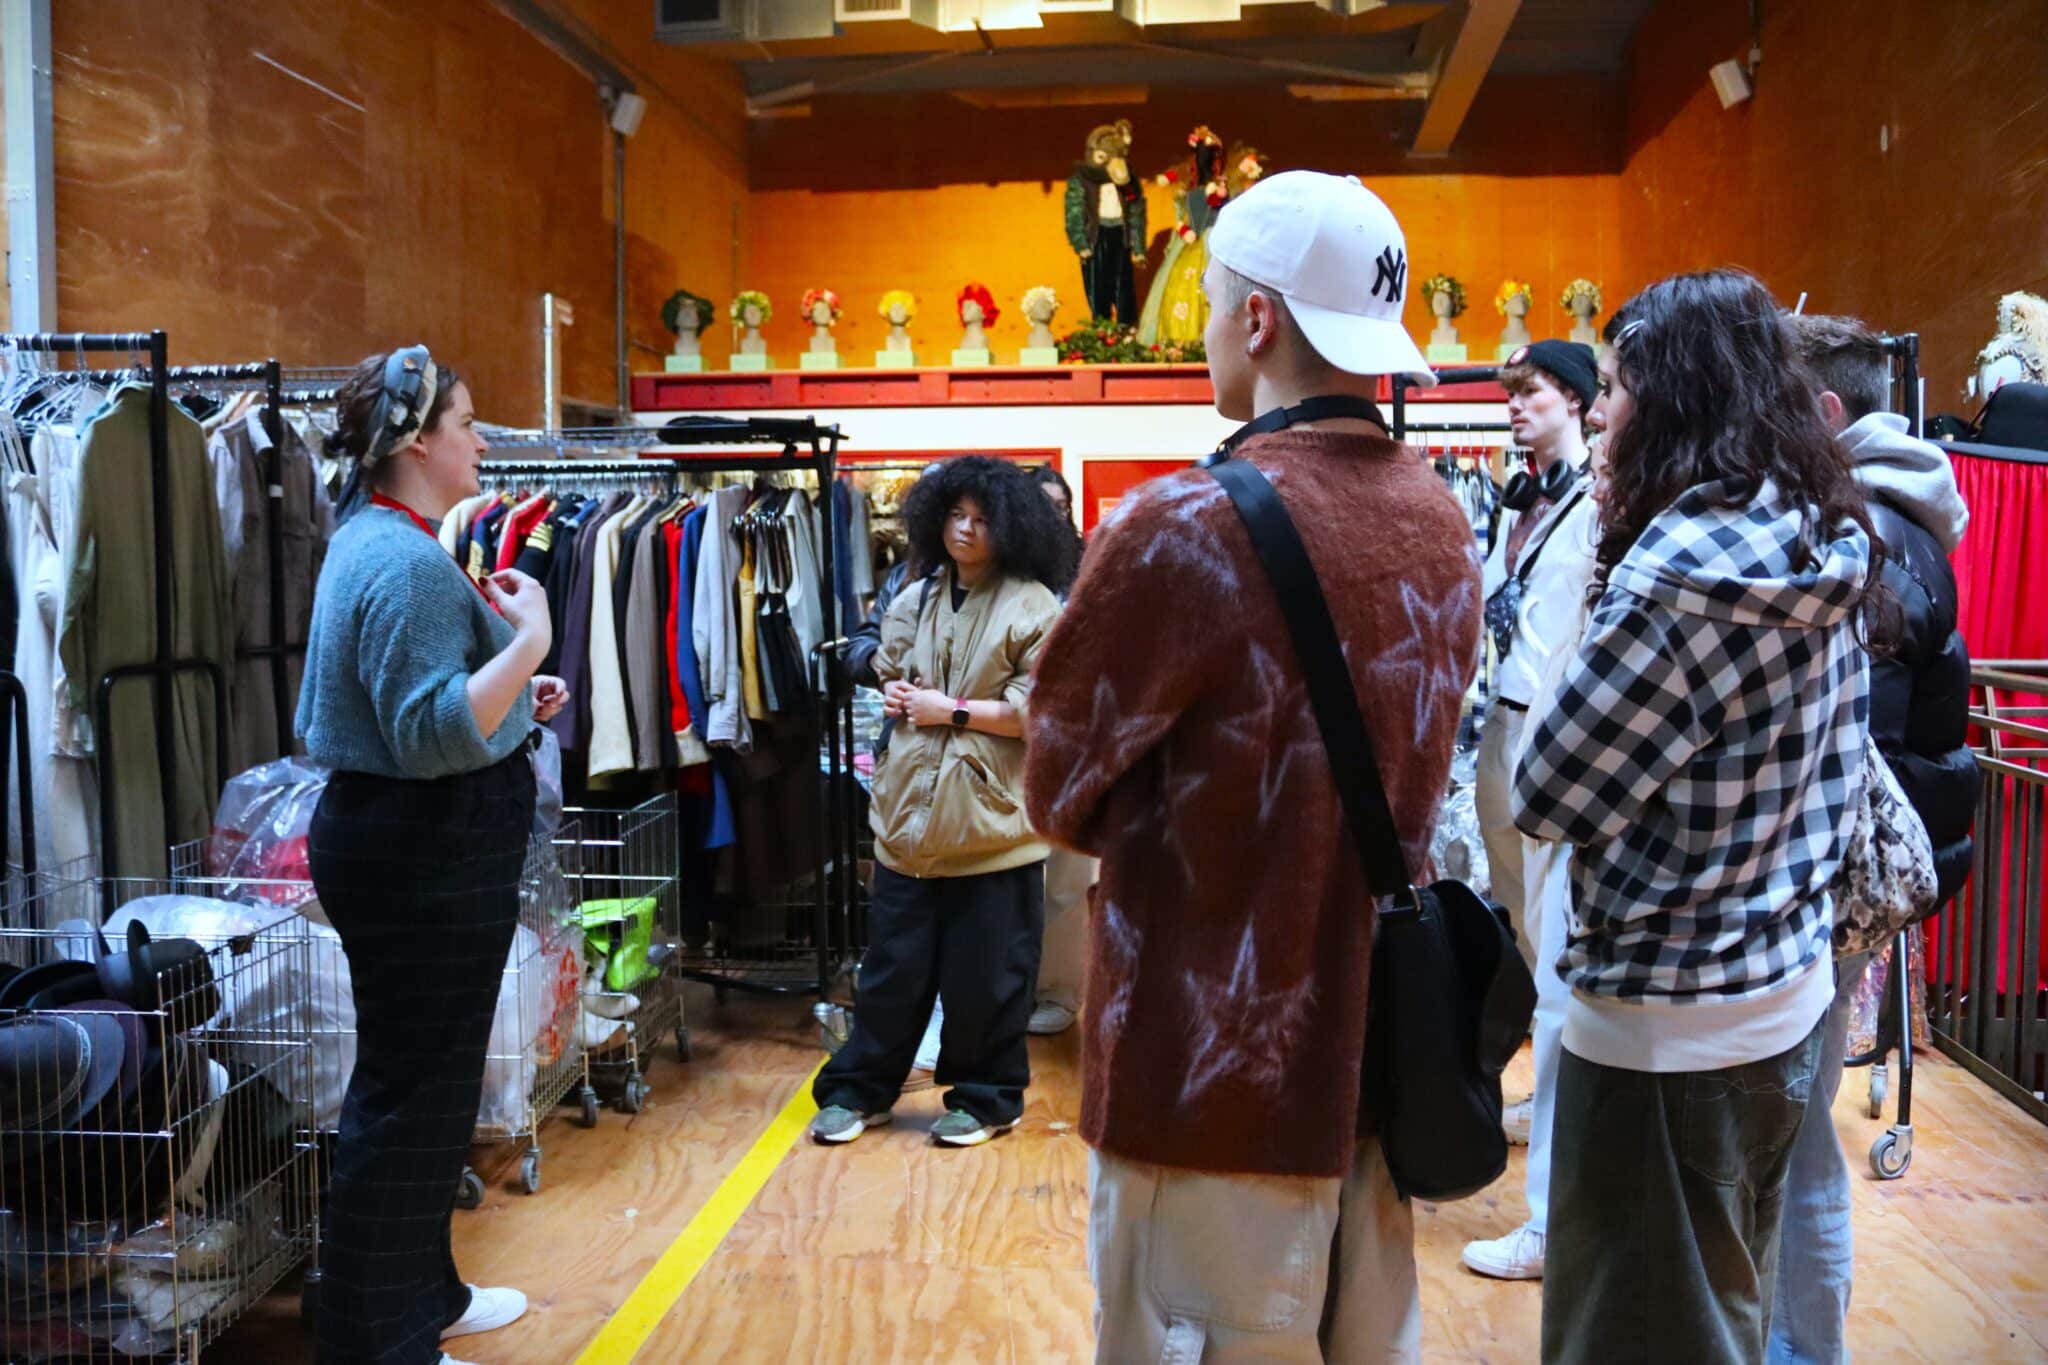 Fashion students visit the RSC - students learning